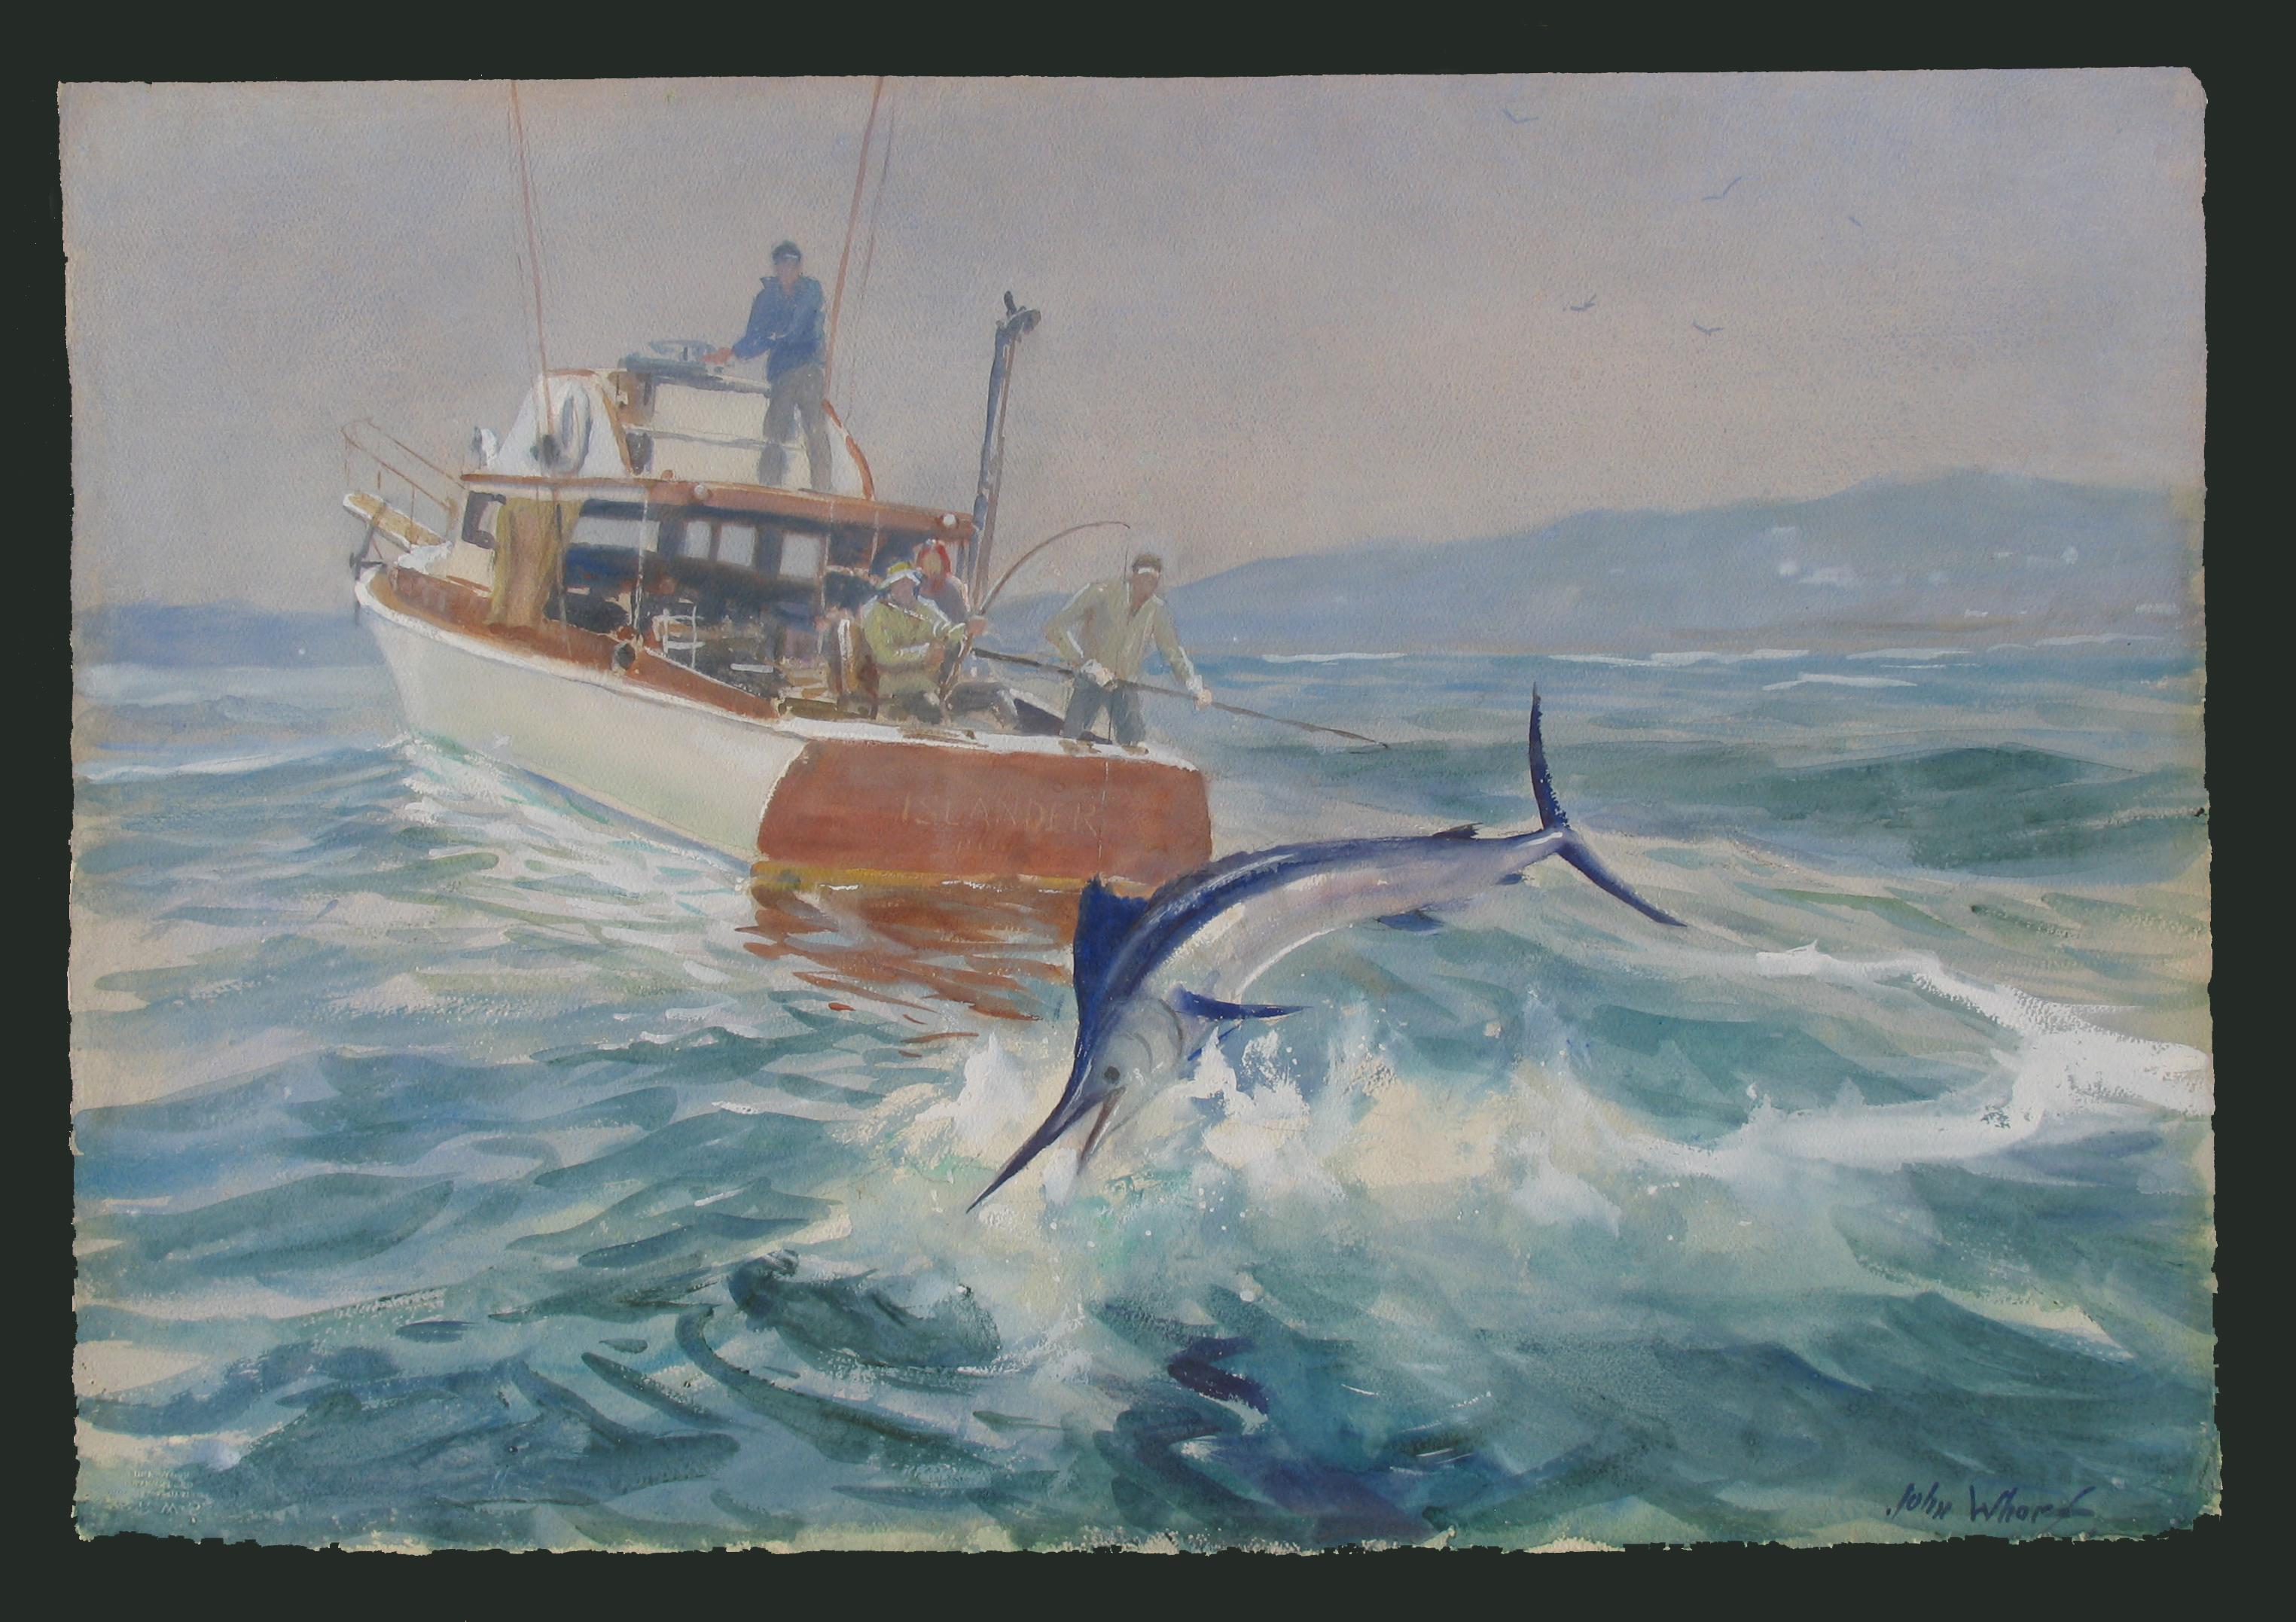 Leaping Marlin (with fisherman on the boat Islander) by John Whorf For Sale 1